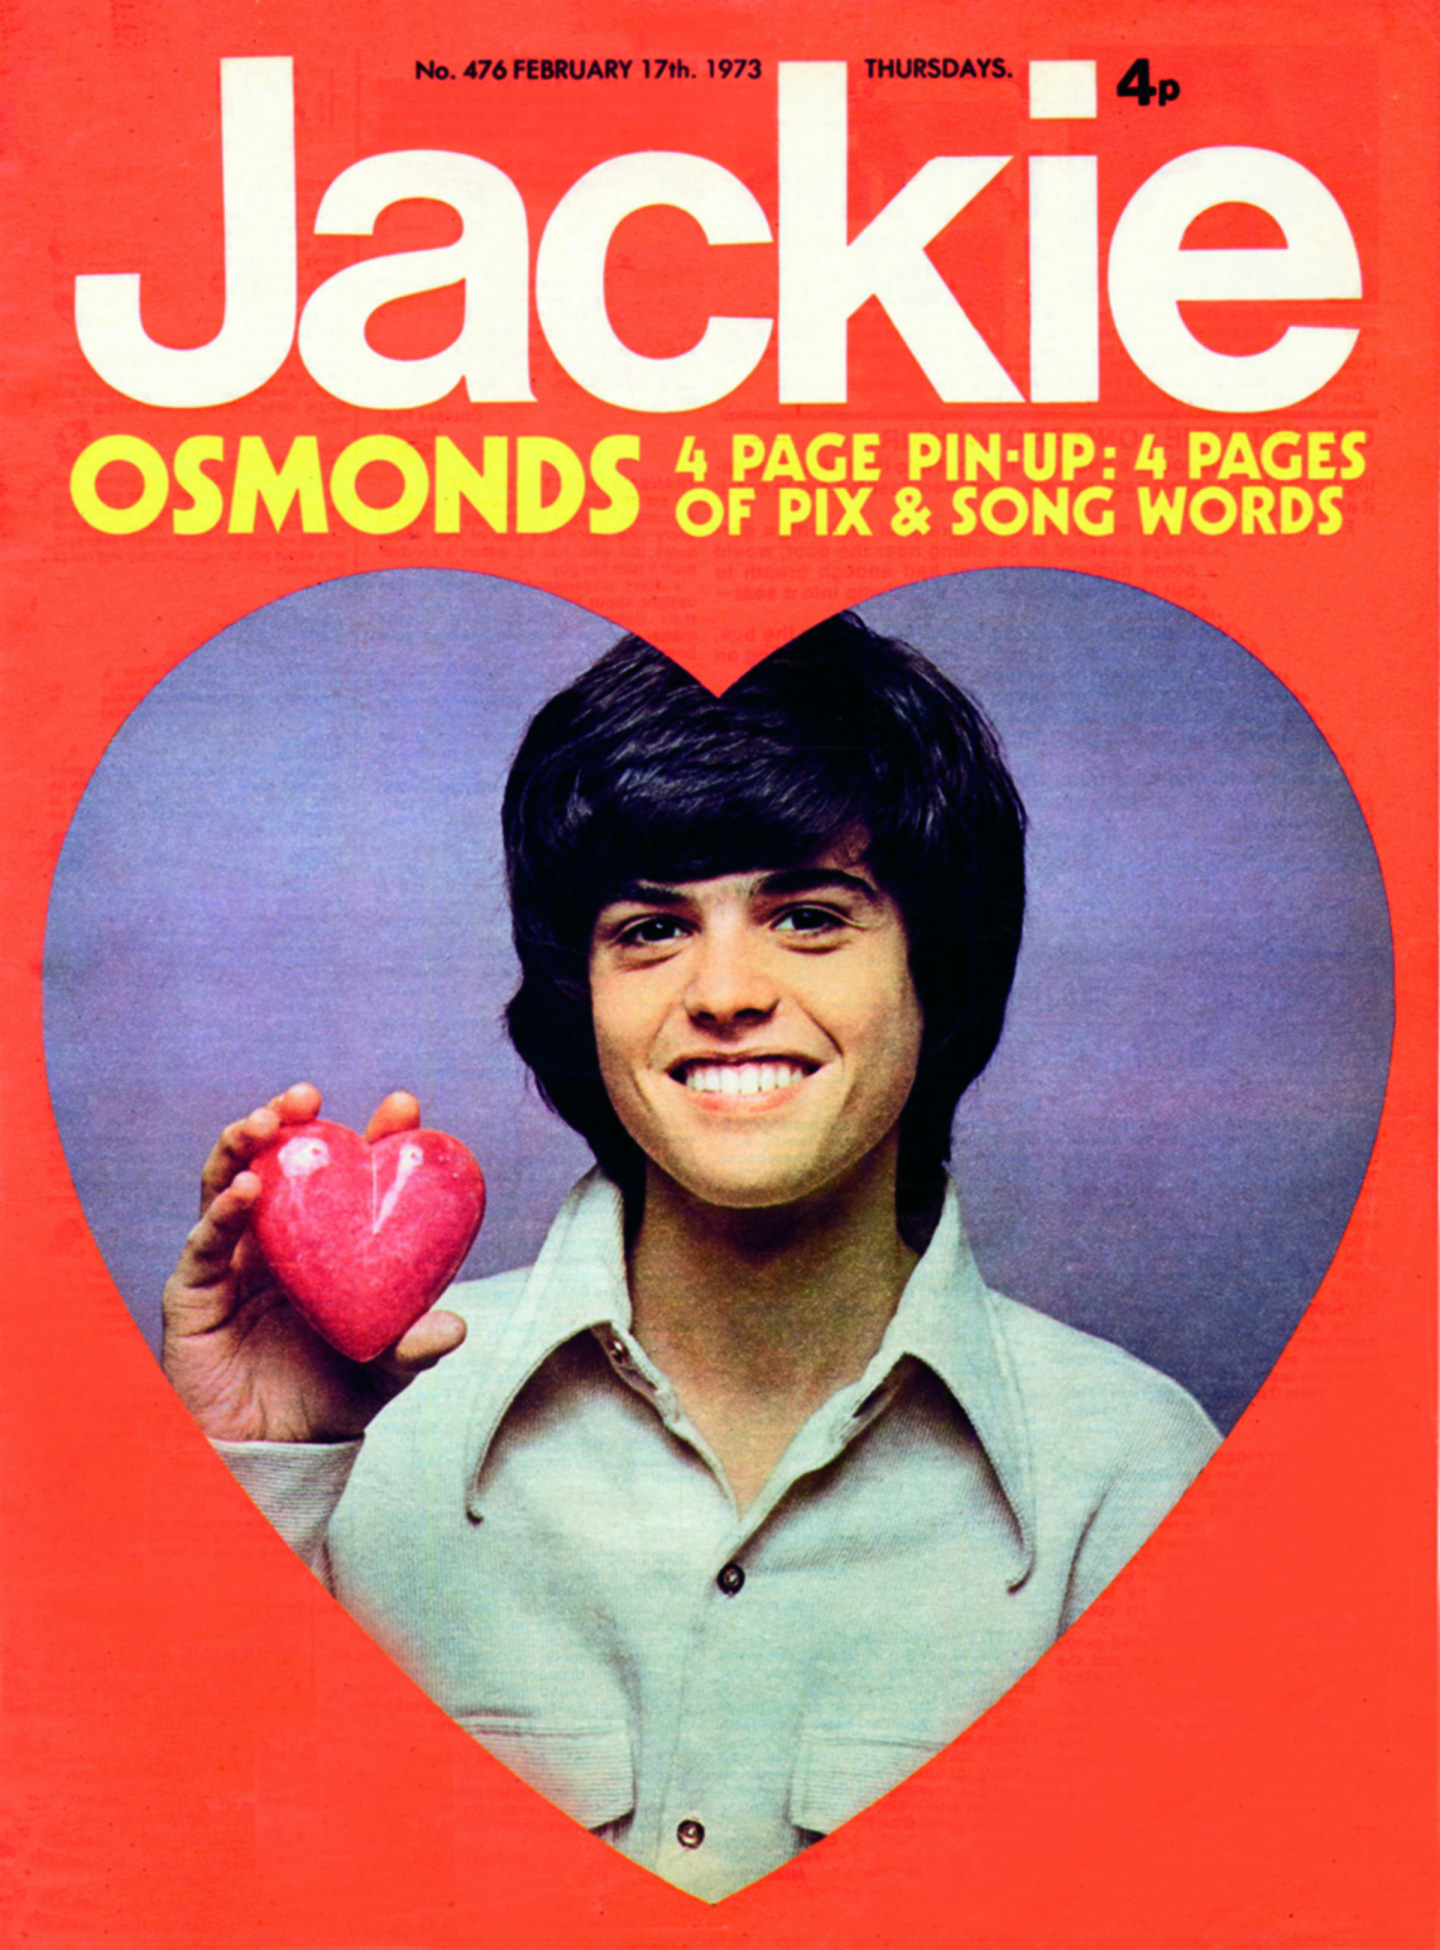 Donny Osmond on the front cover of Jackie 